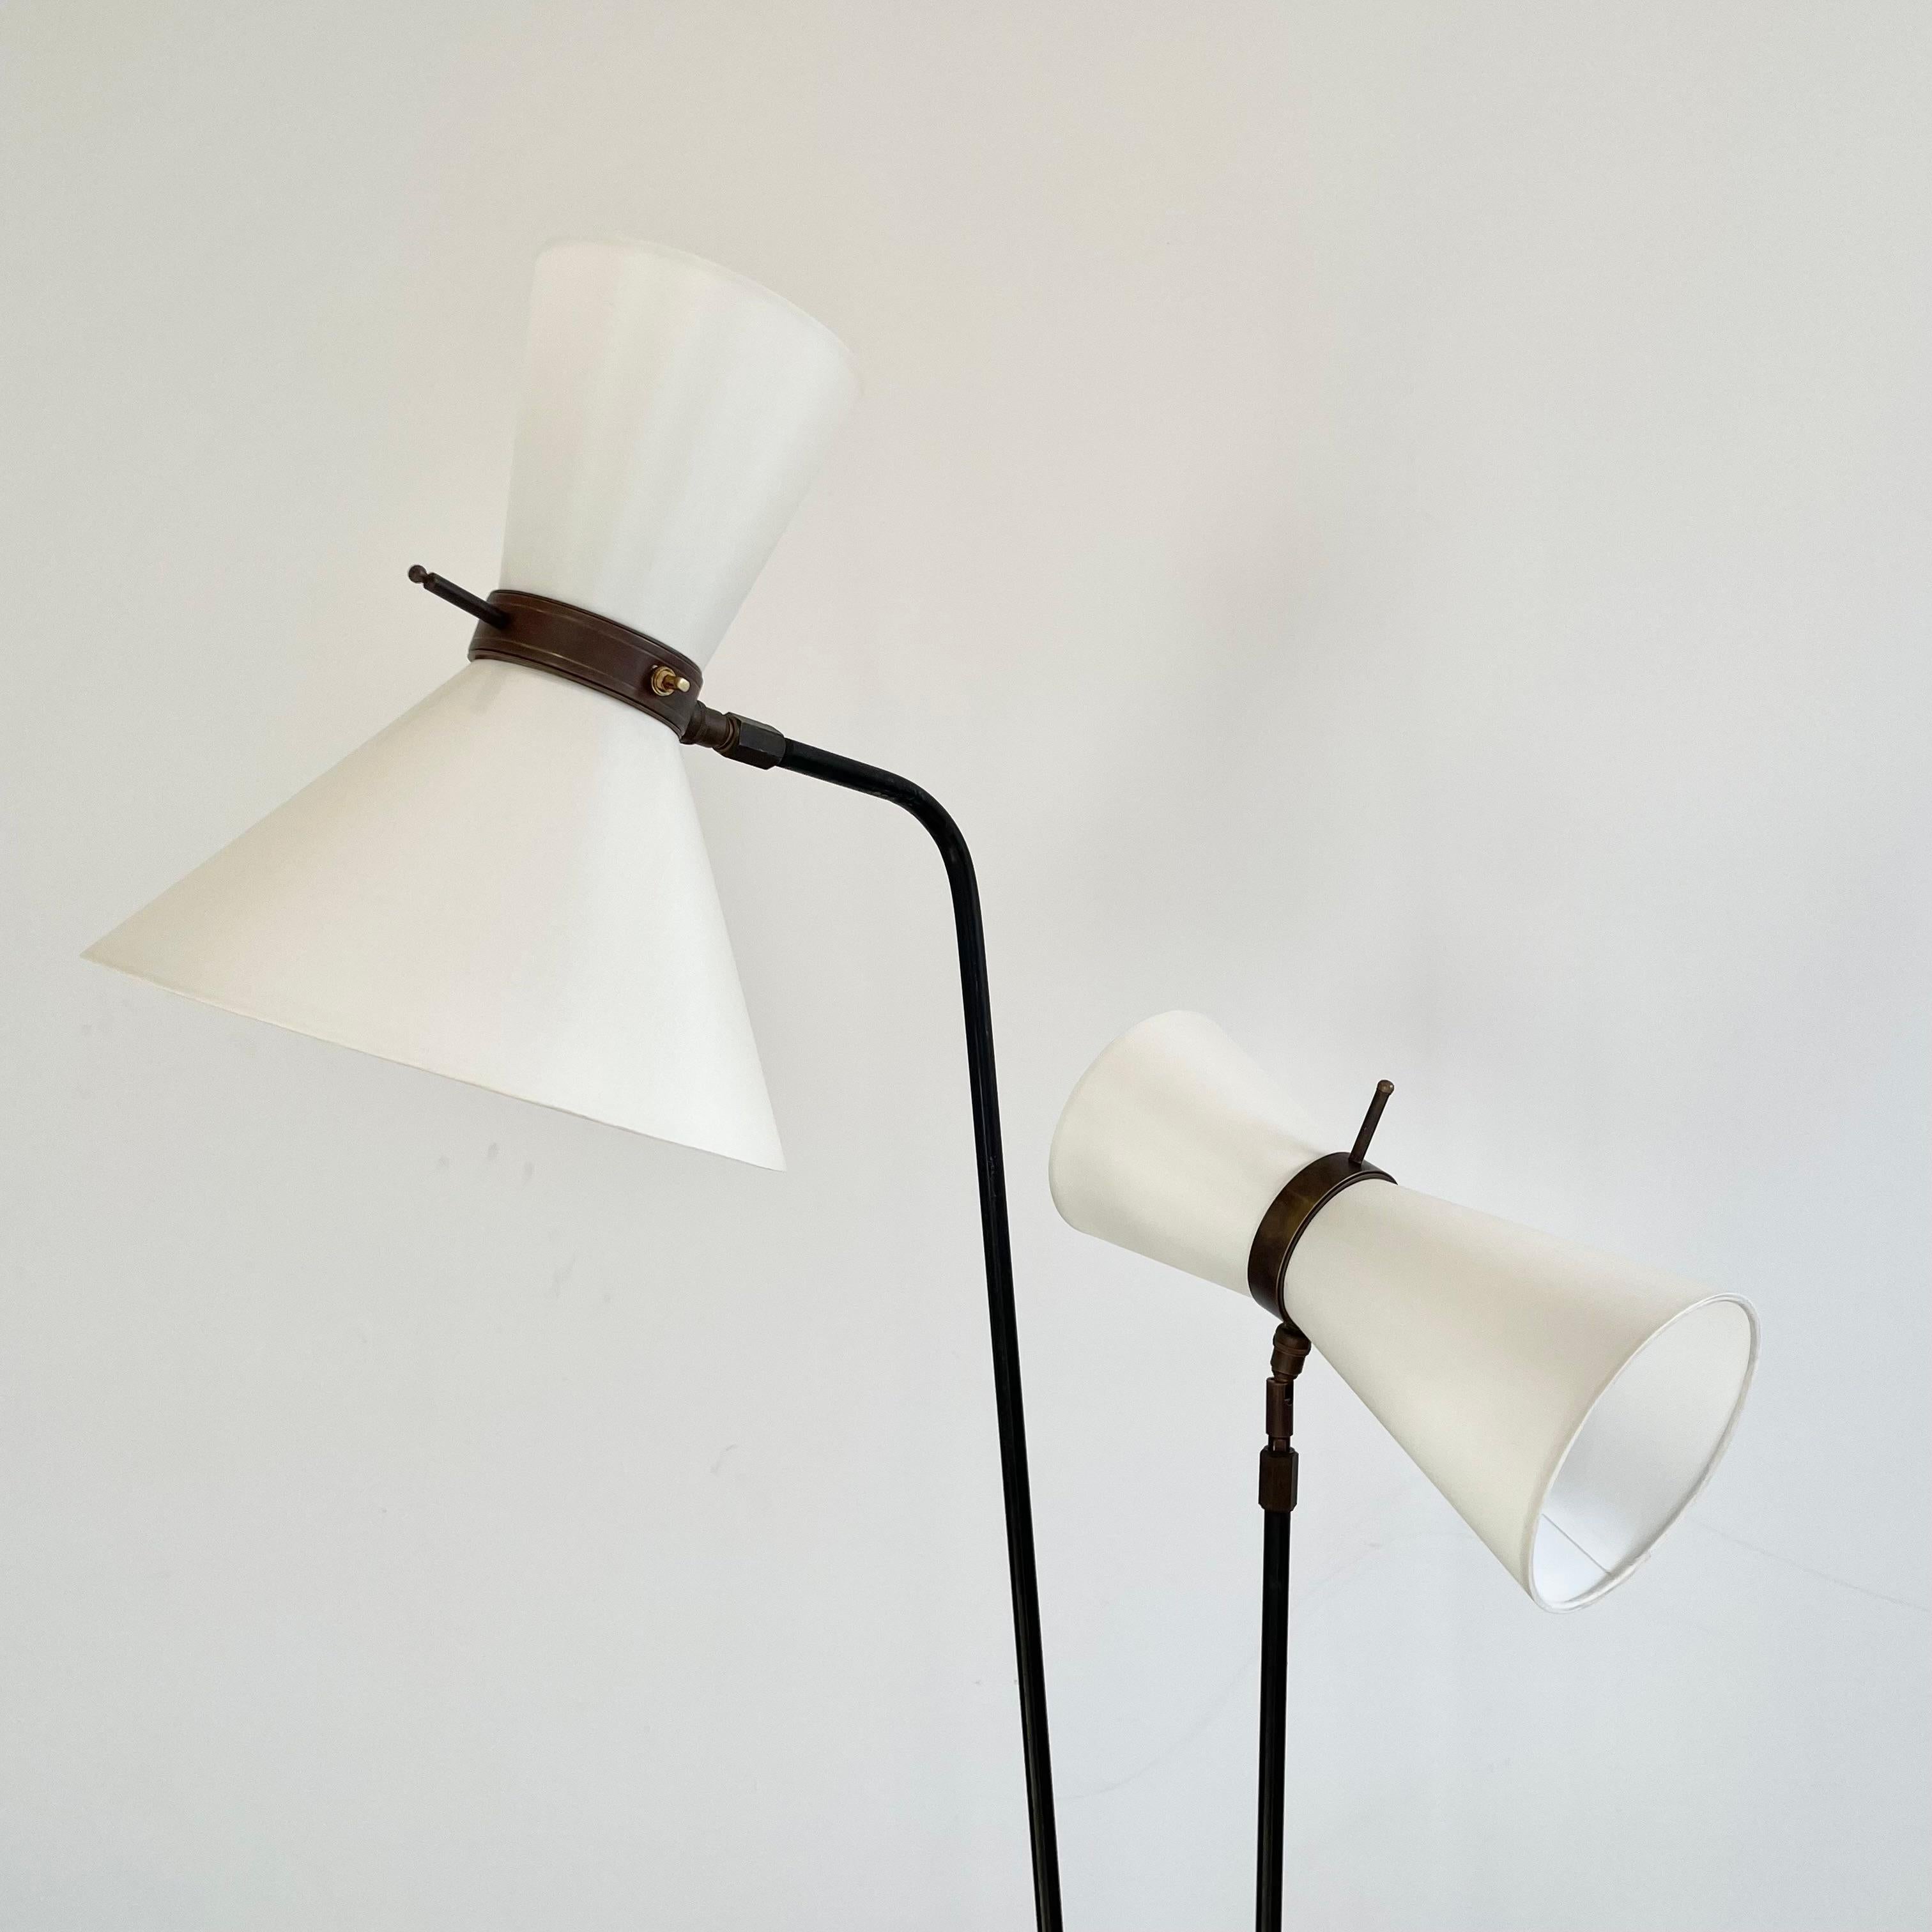 Double Headed Articulating Floor Lamp, 1950s France For Sale 3